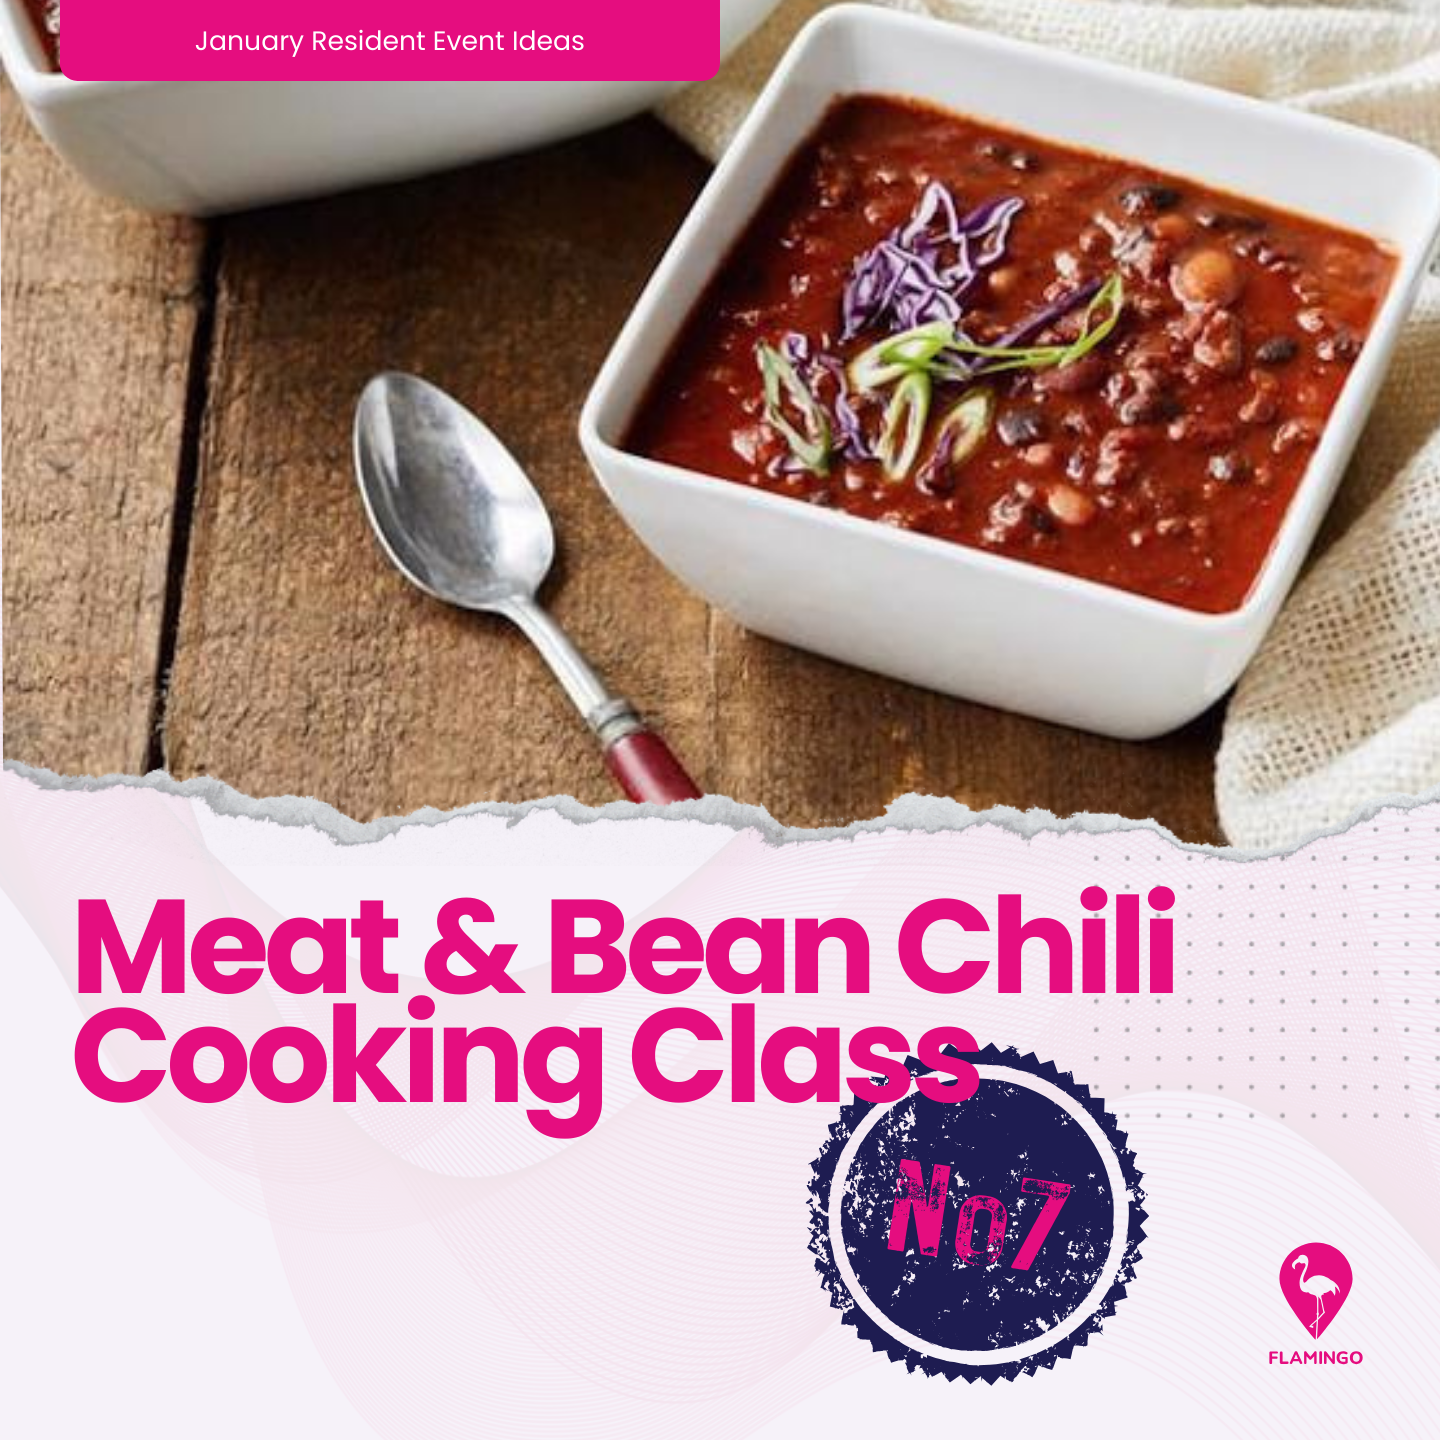 Meat & Bean Chili Cooking Class | January Resident Event Ideas